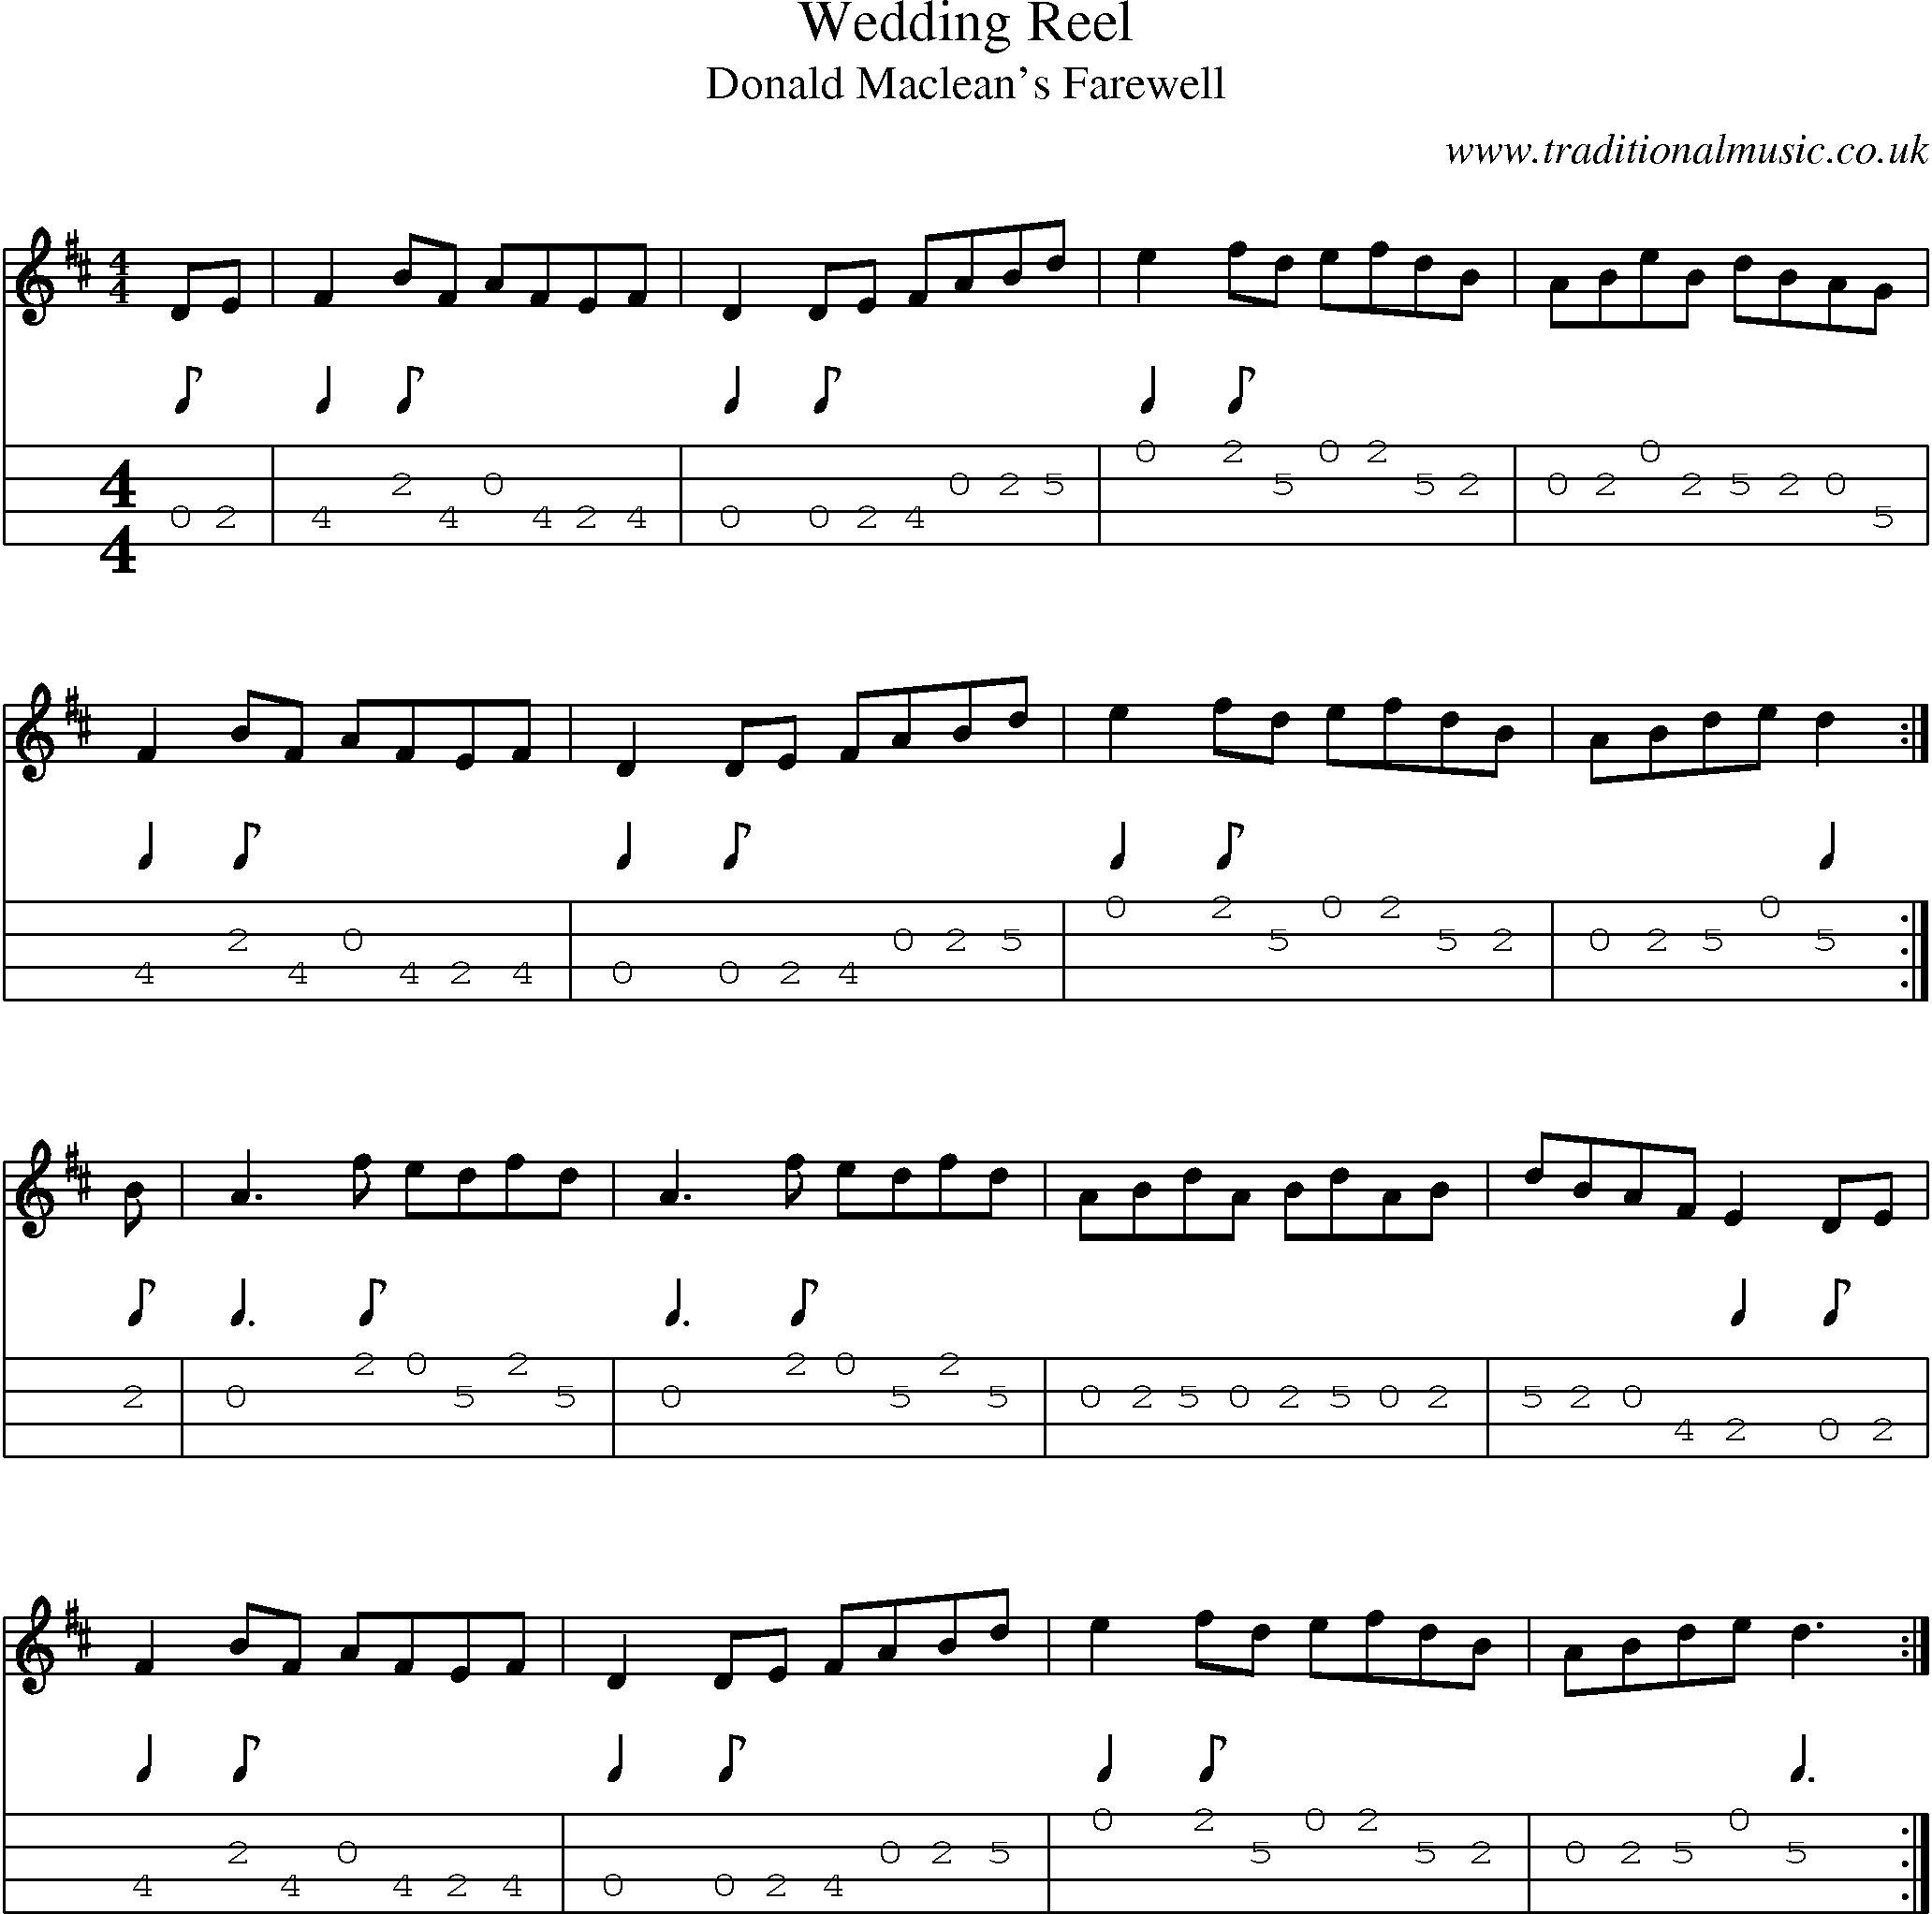 Music Score and Mandolin Tabs for Wedding Reel